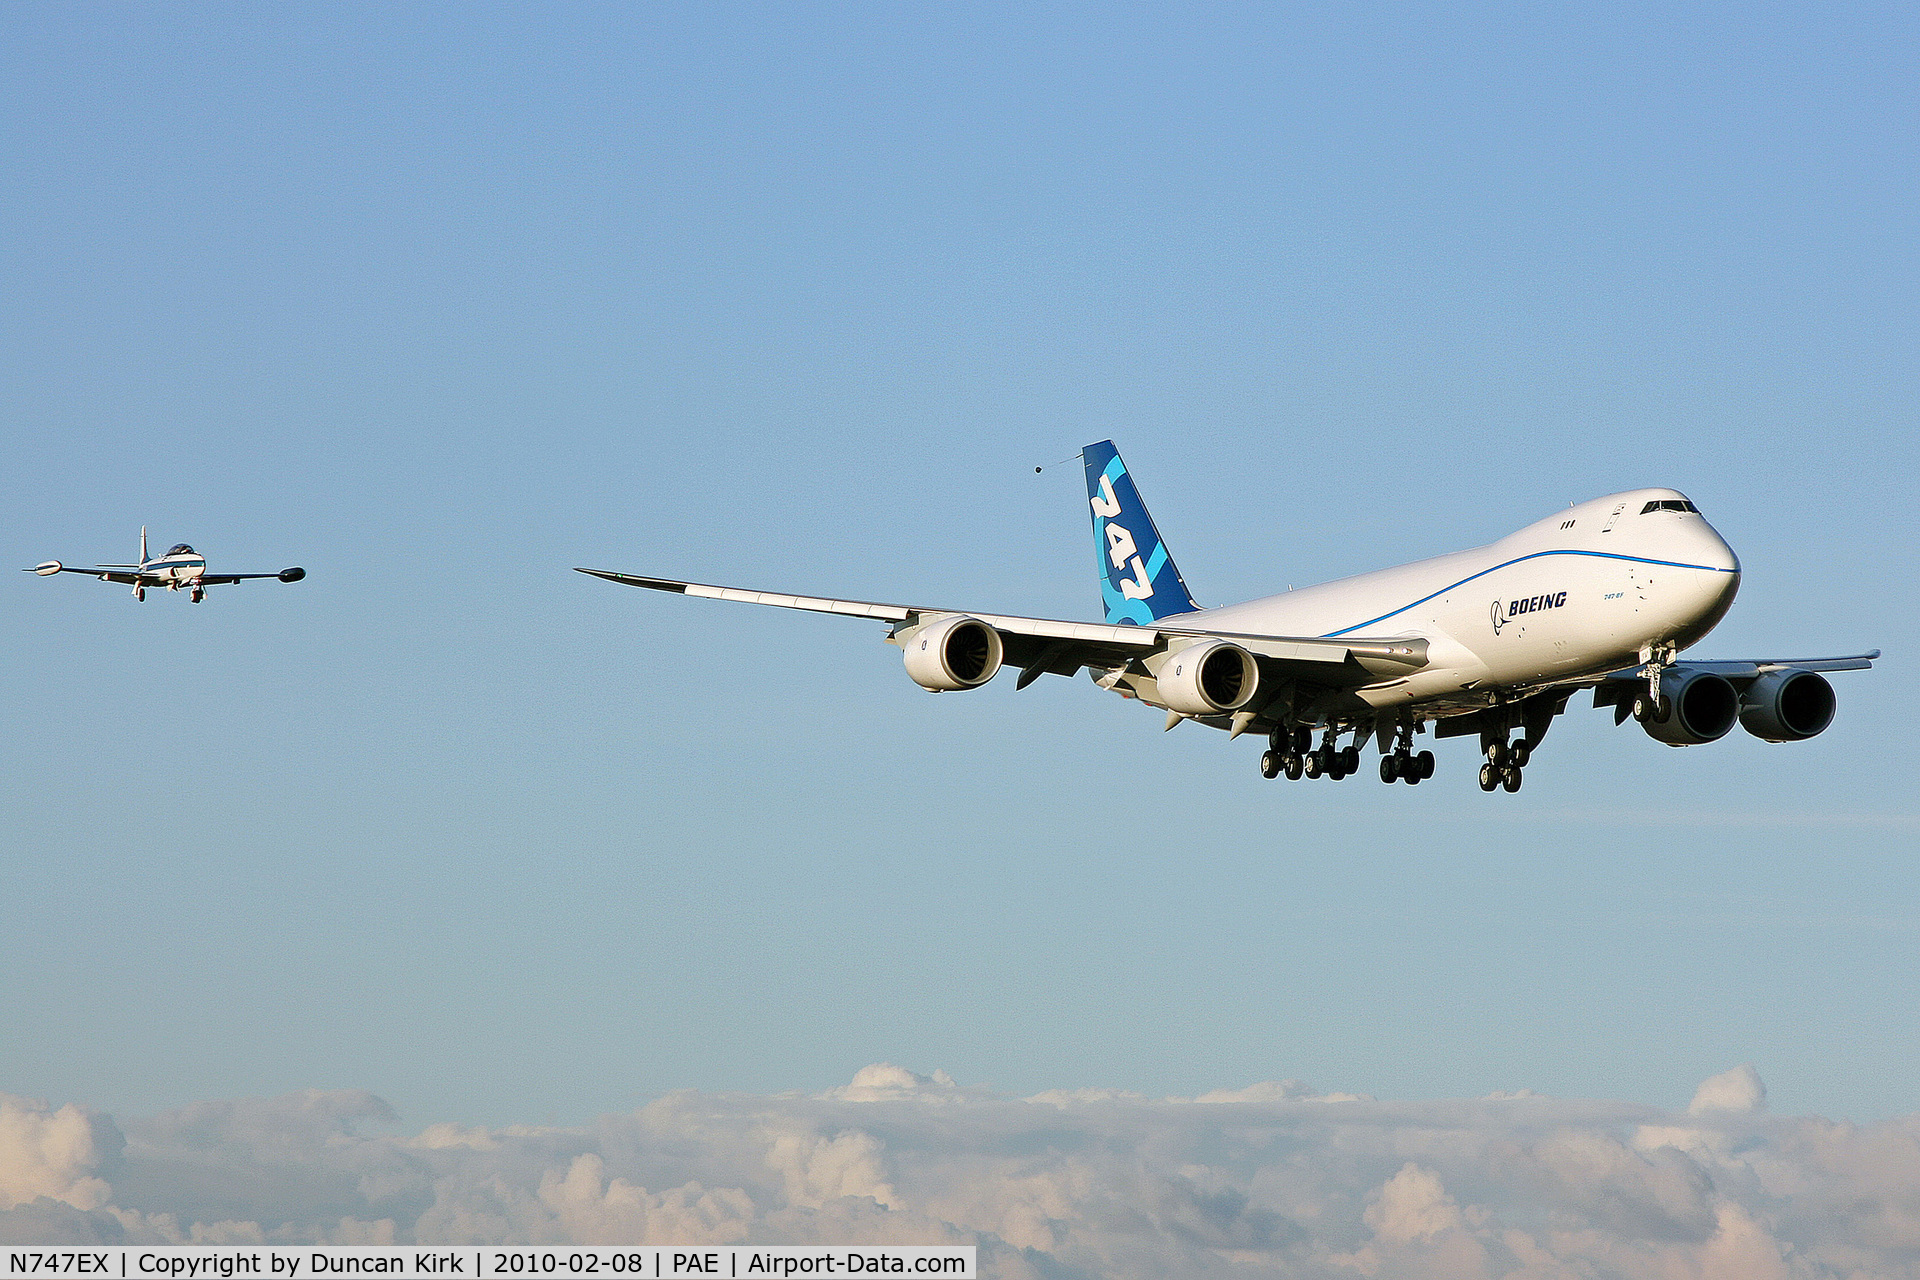 N747EX, 2010 Boeing 747-8F C/N 35808, First flight on finals with chase plane T-33